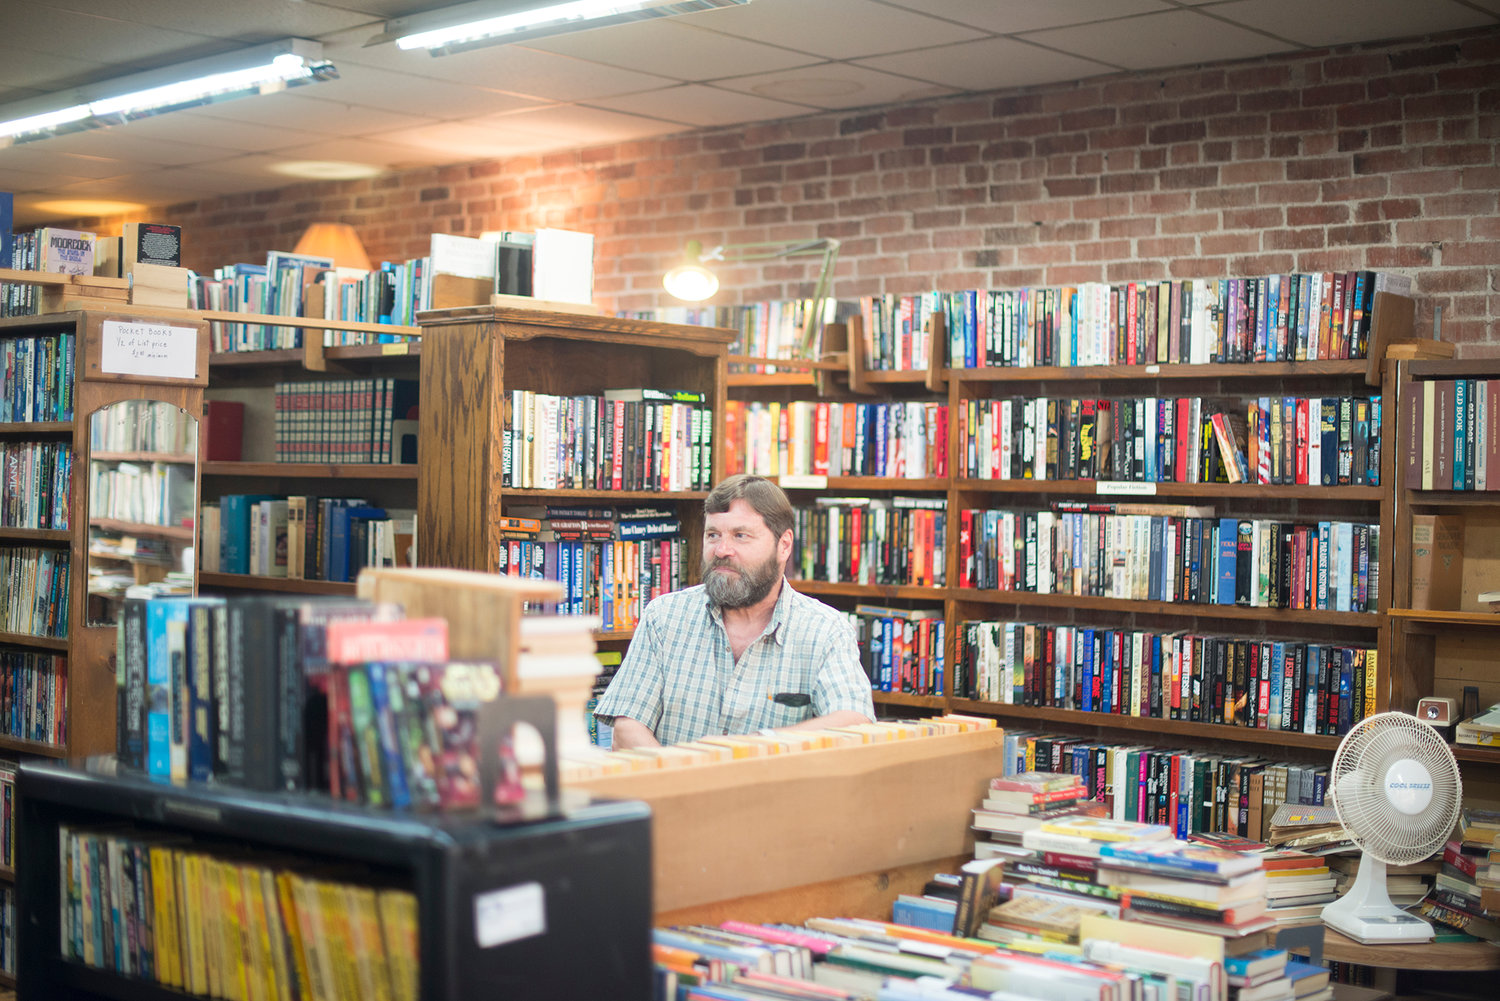 Owner of Tilikum Books Geary Lockard talks to a customer in his bookstore on Wednesday. He said interacting with people is his favorite part of running the store.